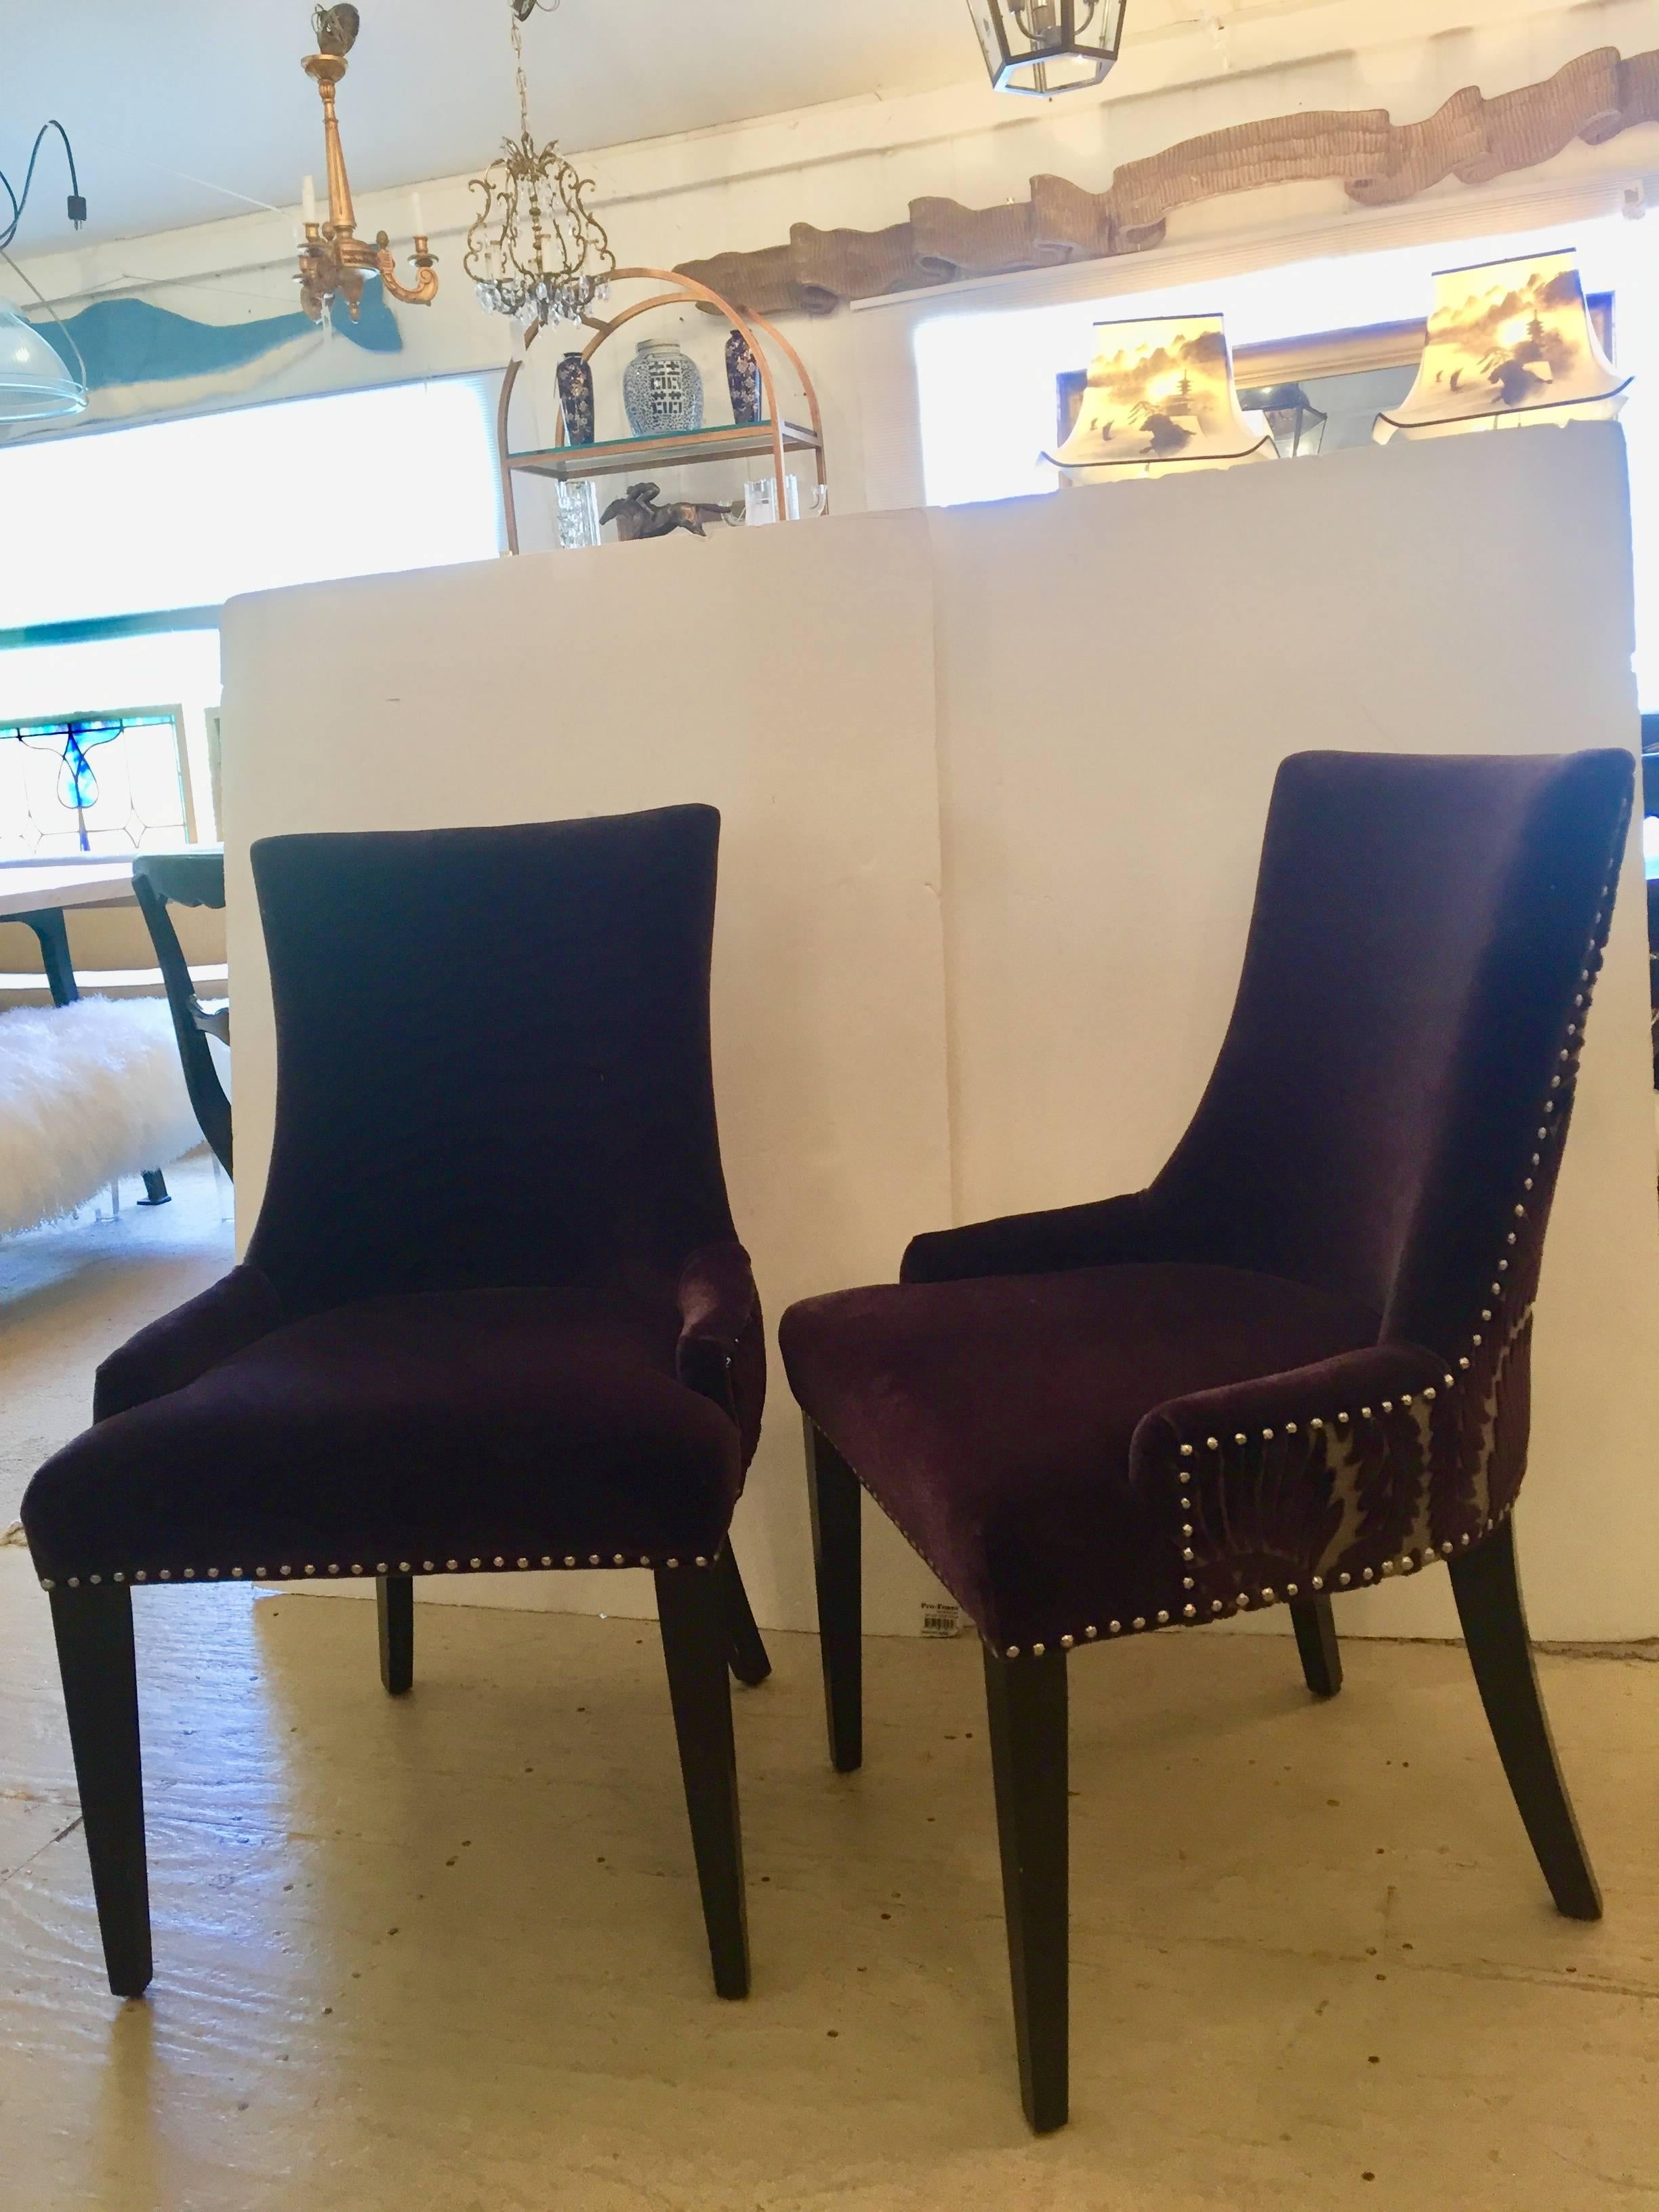 Super chic custom upholstered Restoration Hardware chairs in plush dark purple mohair with Osborne and Little cut velvet fabric on the backs, finished with nailheads. Great at the ends of an elegant dining table, or as living room chairs.